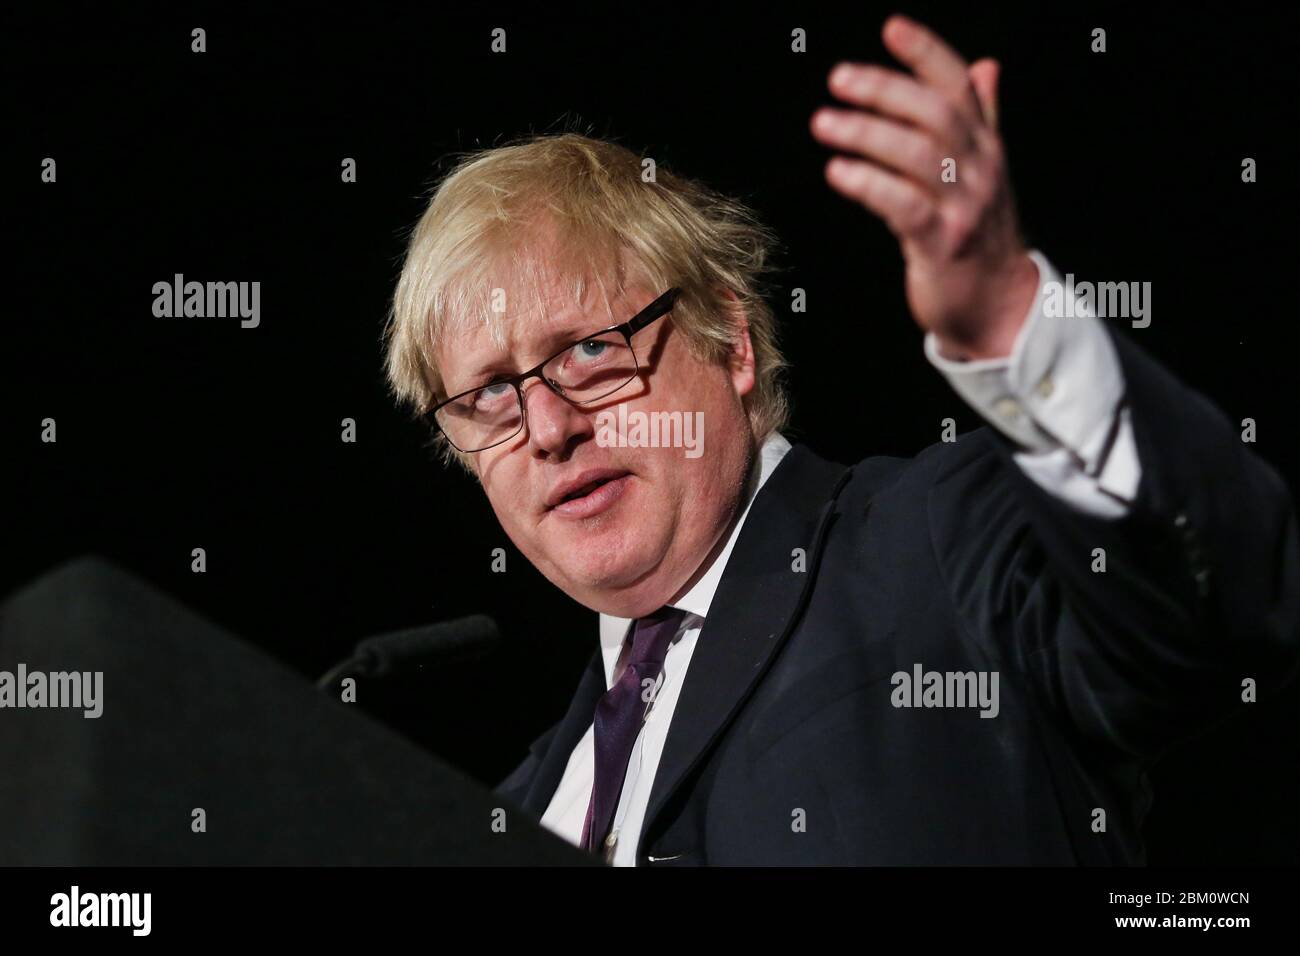 Conservative MP and Mayor of London Boris Johnson speaks at a Vote Leave event in Leeds, West Yorkshire. Campaigning for the referendum, which will de Stock Photo